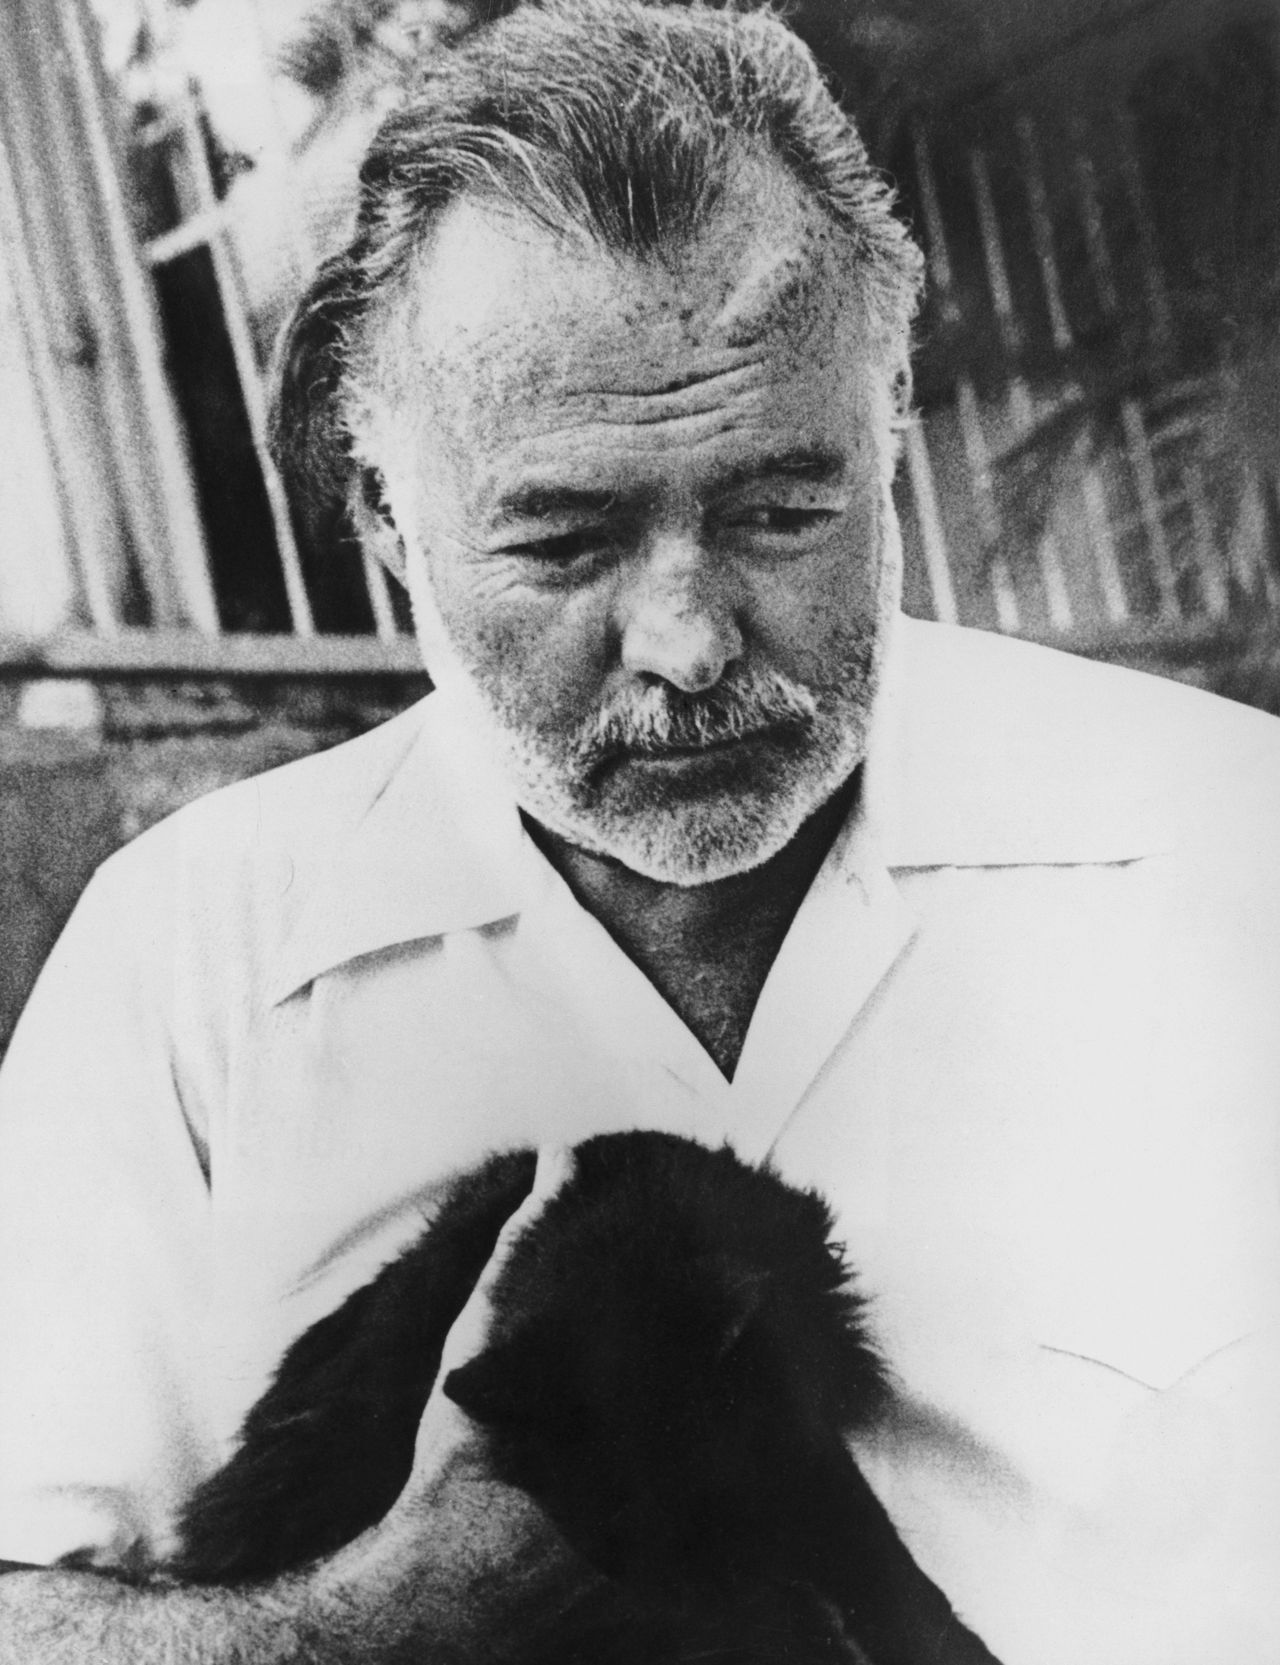 American novelist and journalist Ernest Hemingway (1899 - 1961) with his pet cat, circa 1950.